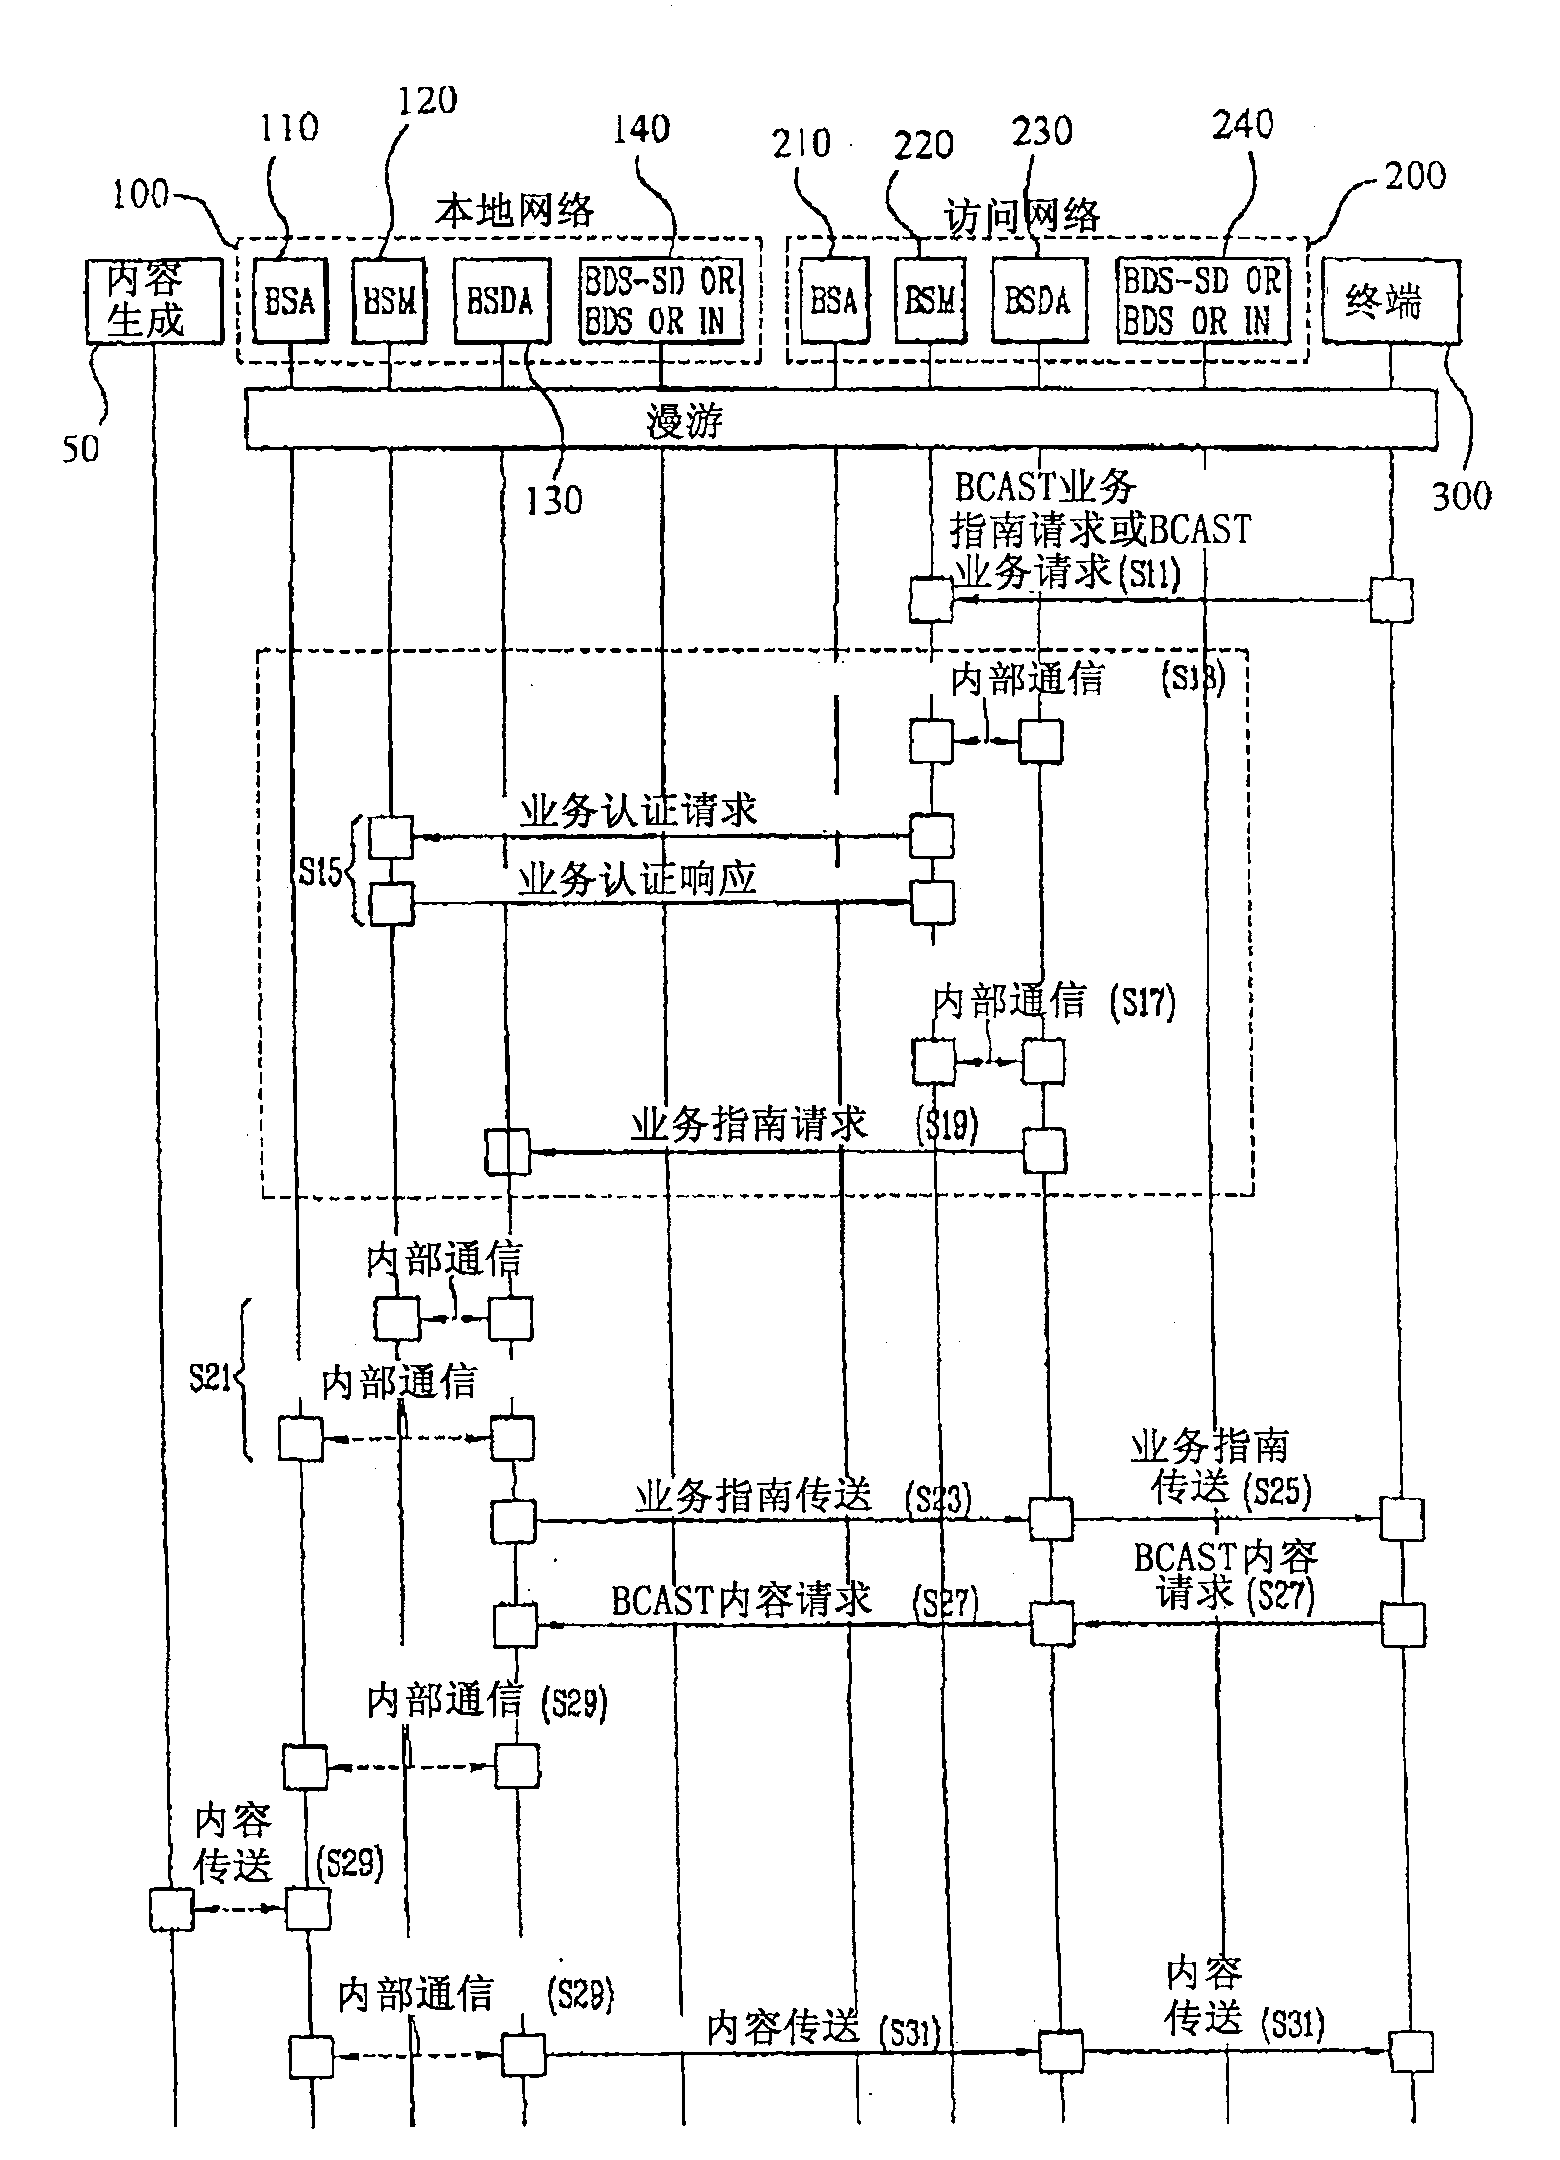 Broadcast/multicast service system and method providing inter-network roaming